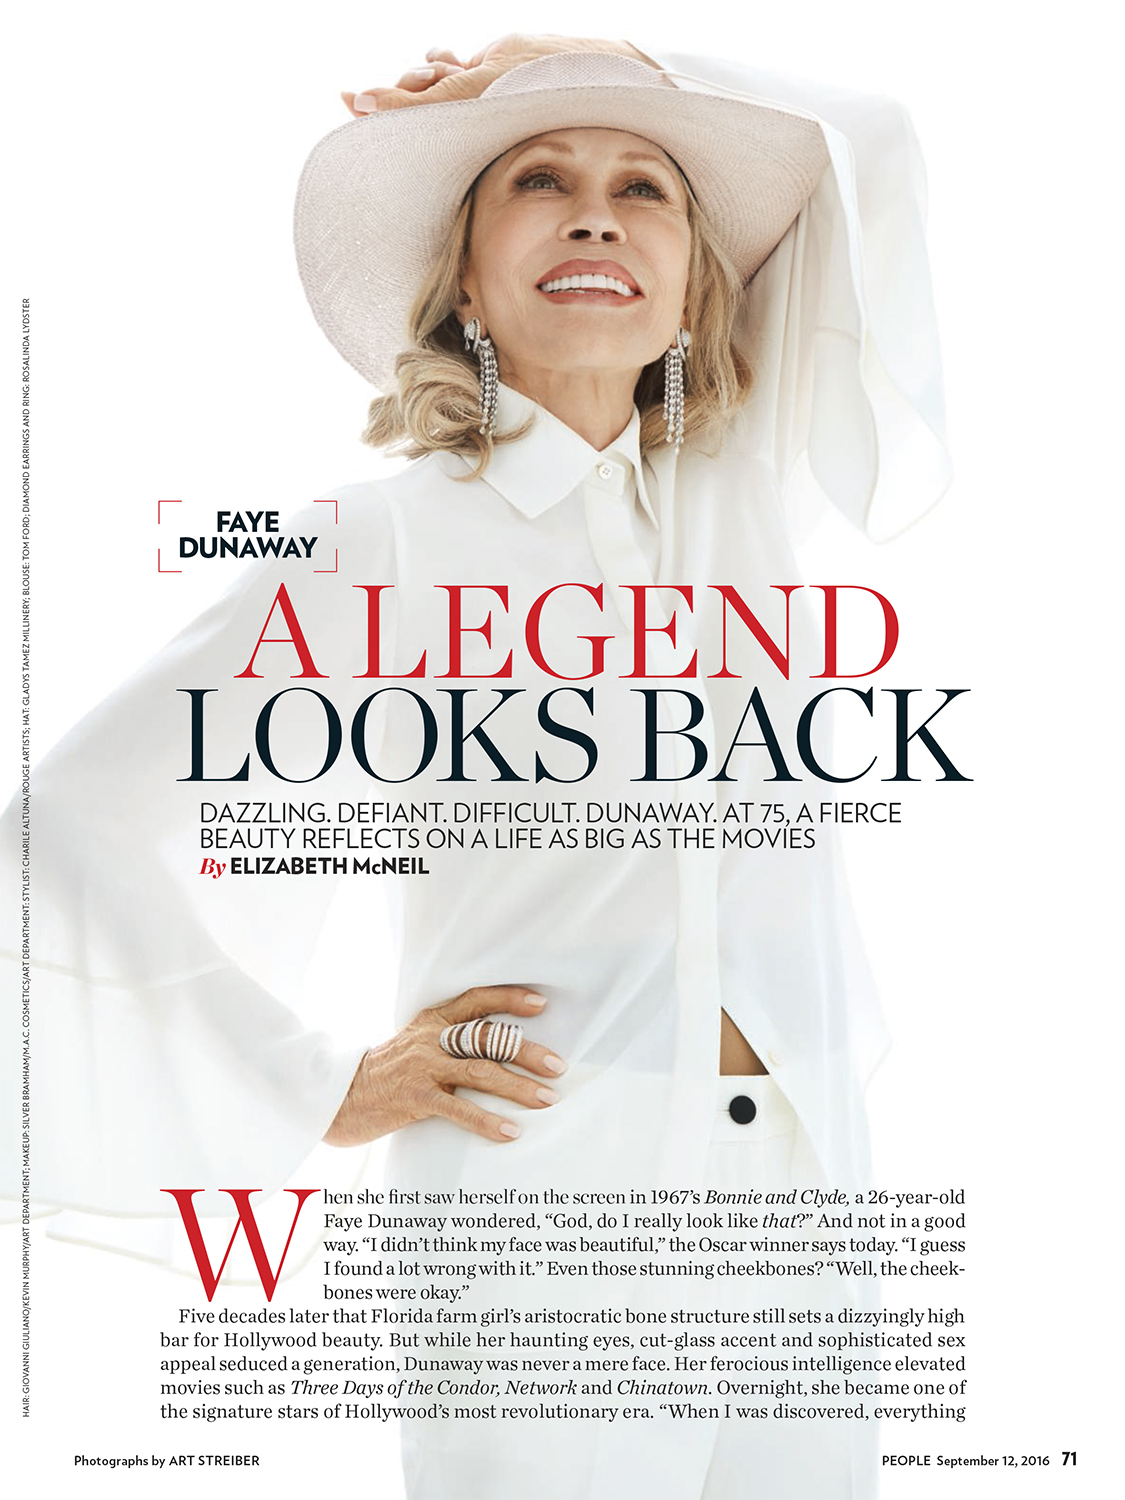 Faye Dunaway in the 9-12-16 issue_PEO_20160912_71_1268894_ARTICLE-1.jpg